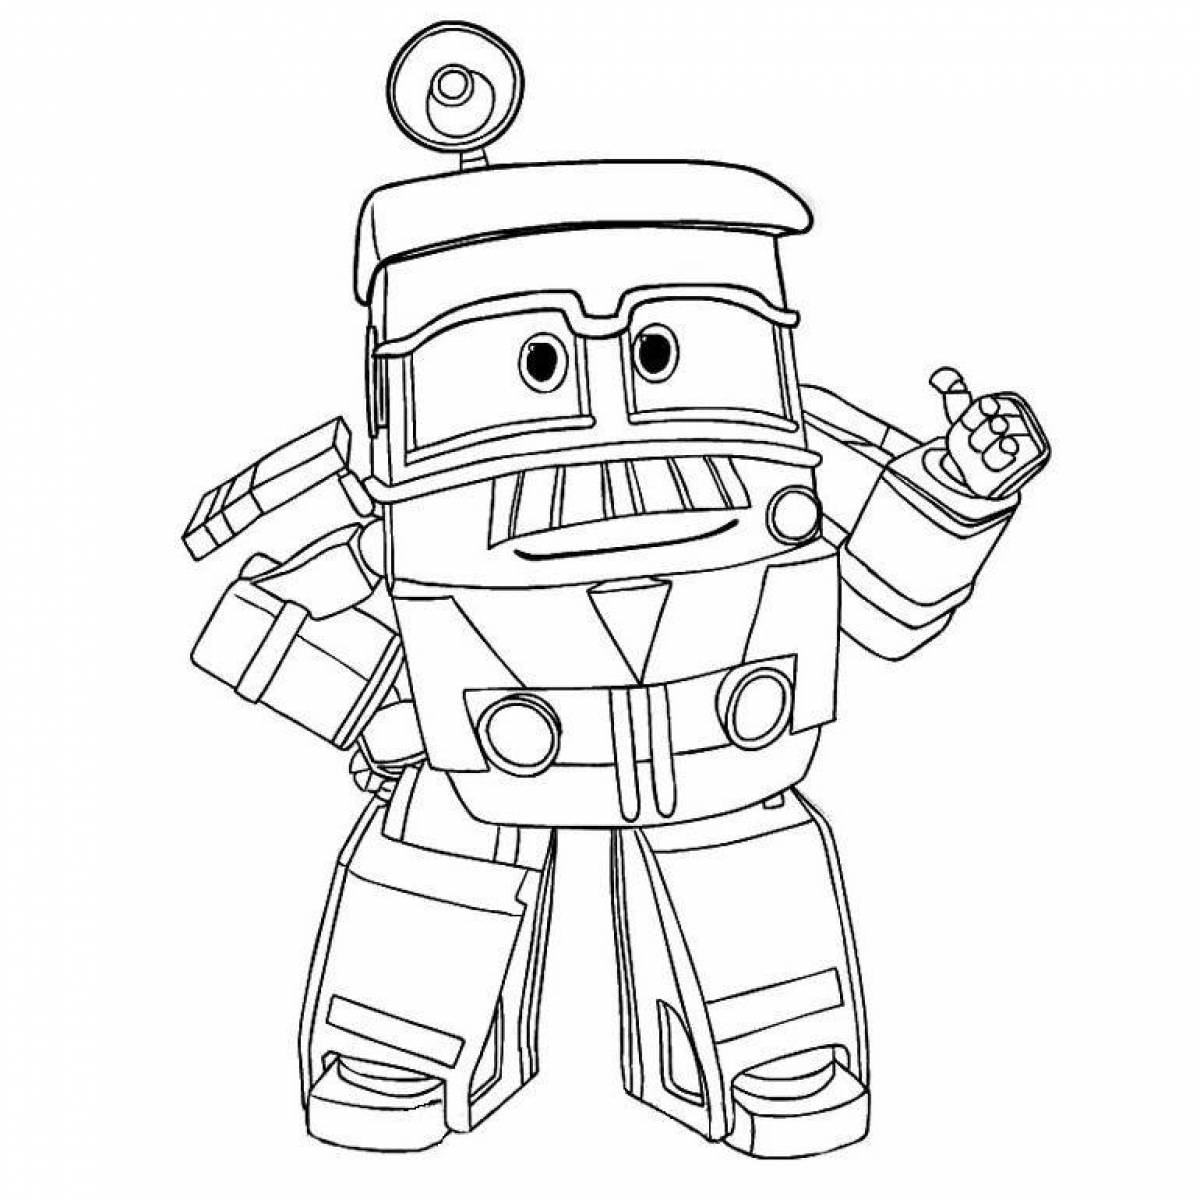 Colorful duke train robot coloring page